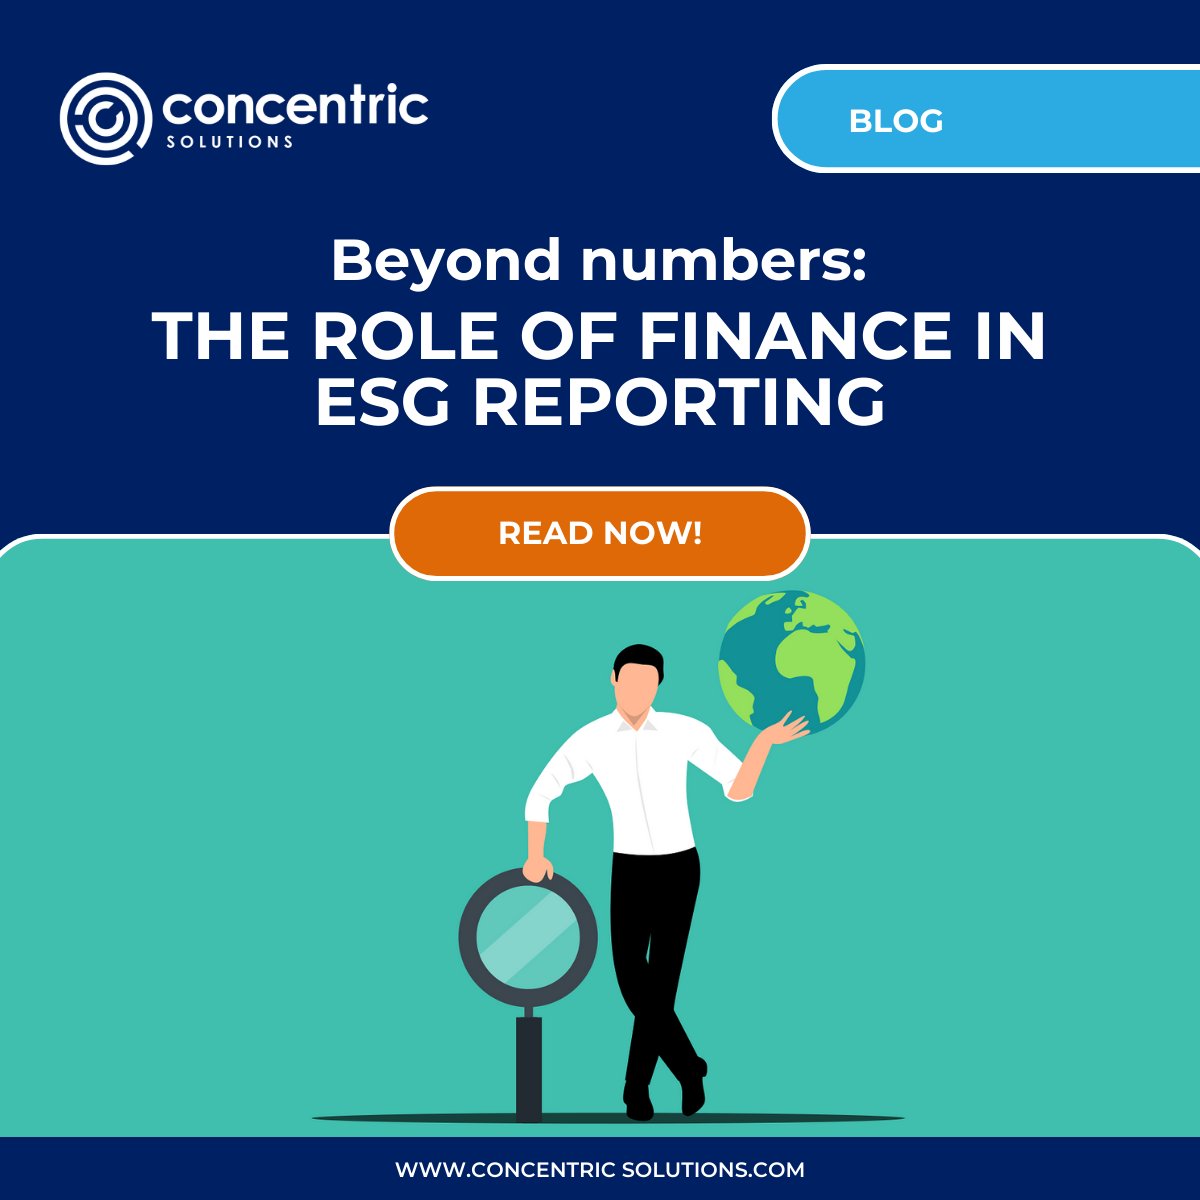 Why are Finance teams uniquely positioned to take on the responsibility of ESG reporting? Our latest blog explores the crucial role Finance can play in #ESGReporting>> concentricsolutions.com/blog-article/t… #ESG #financialreporting